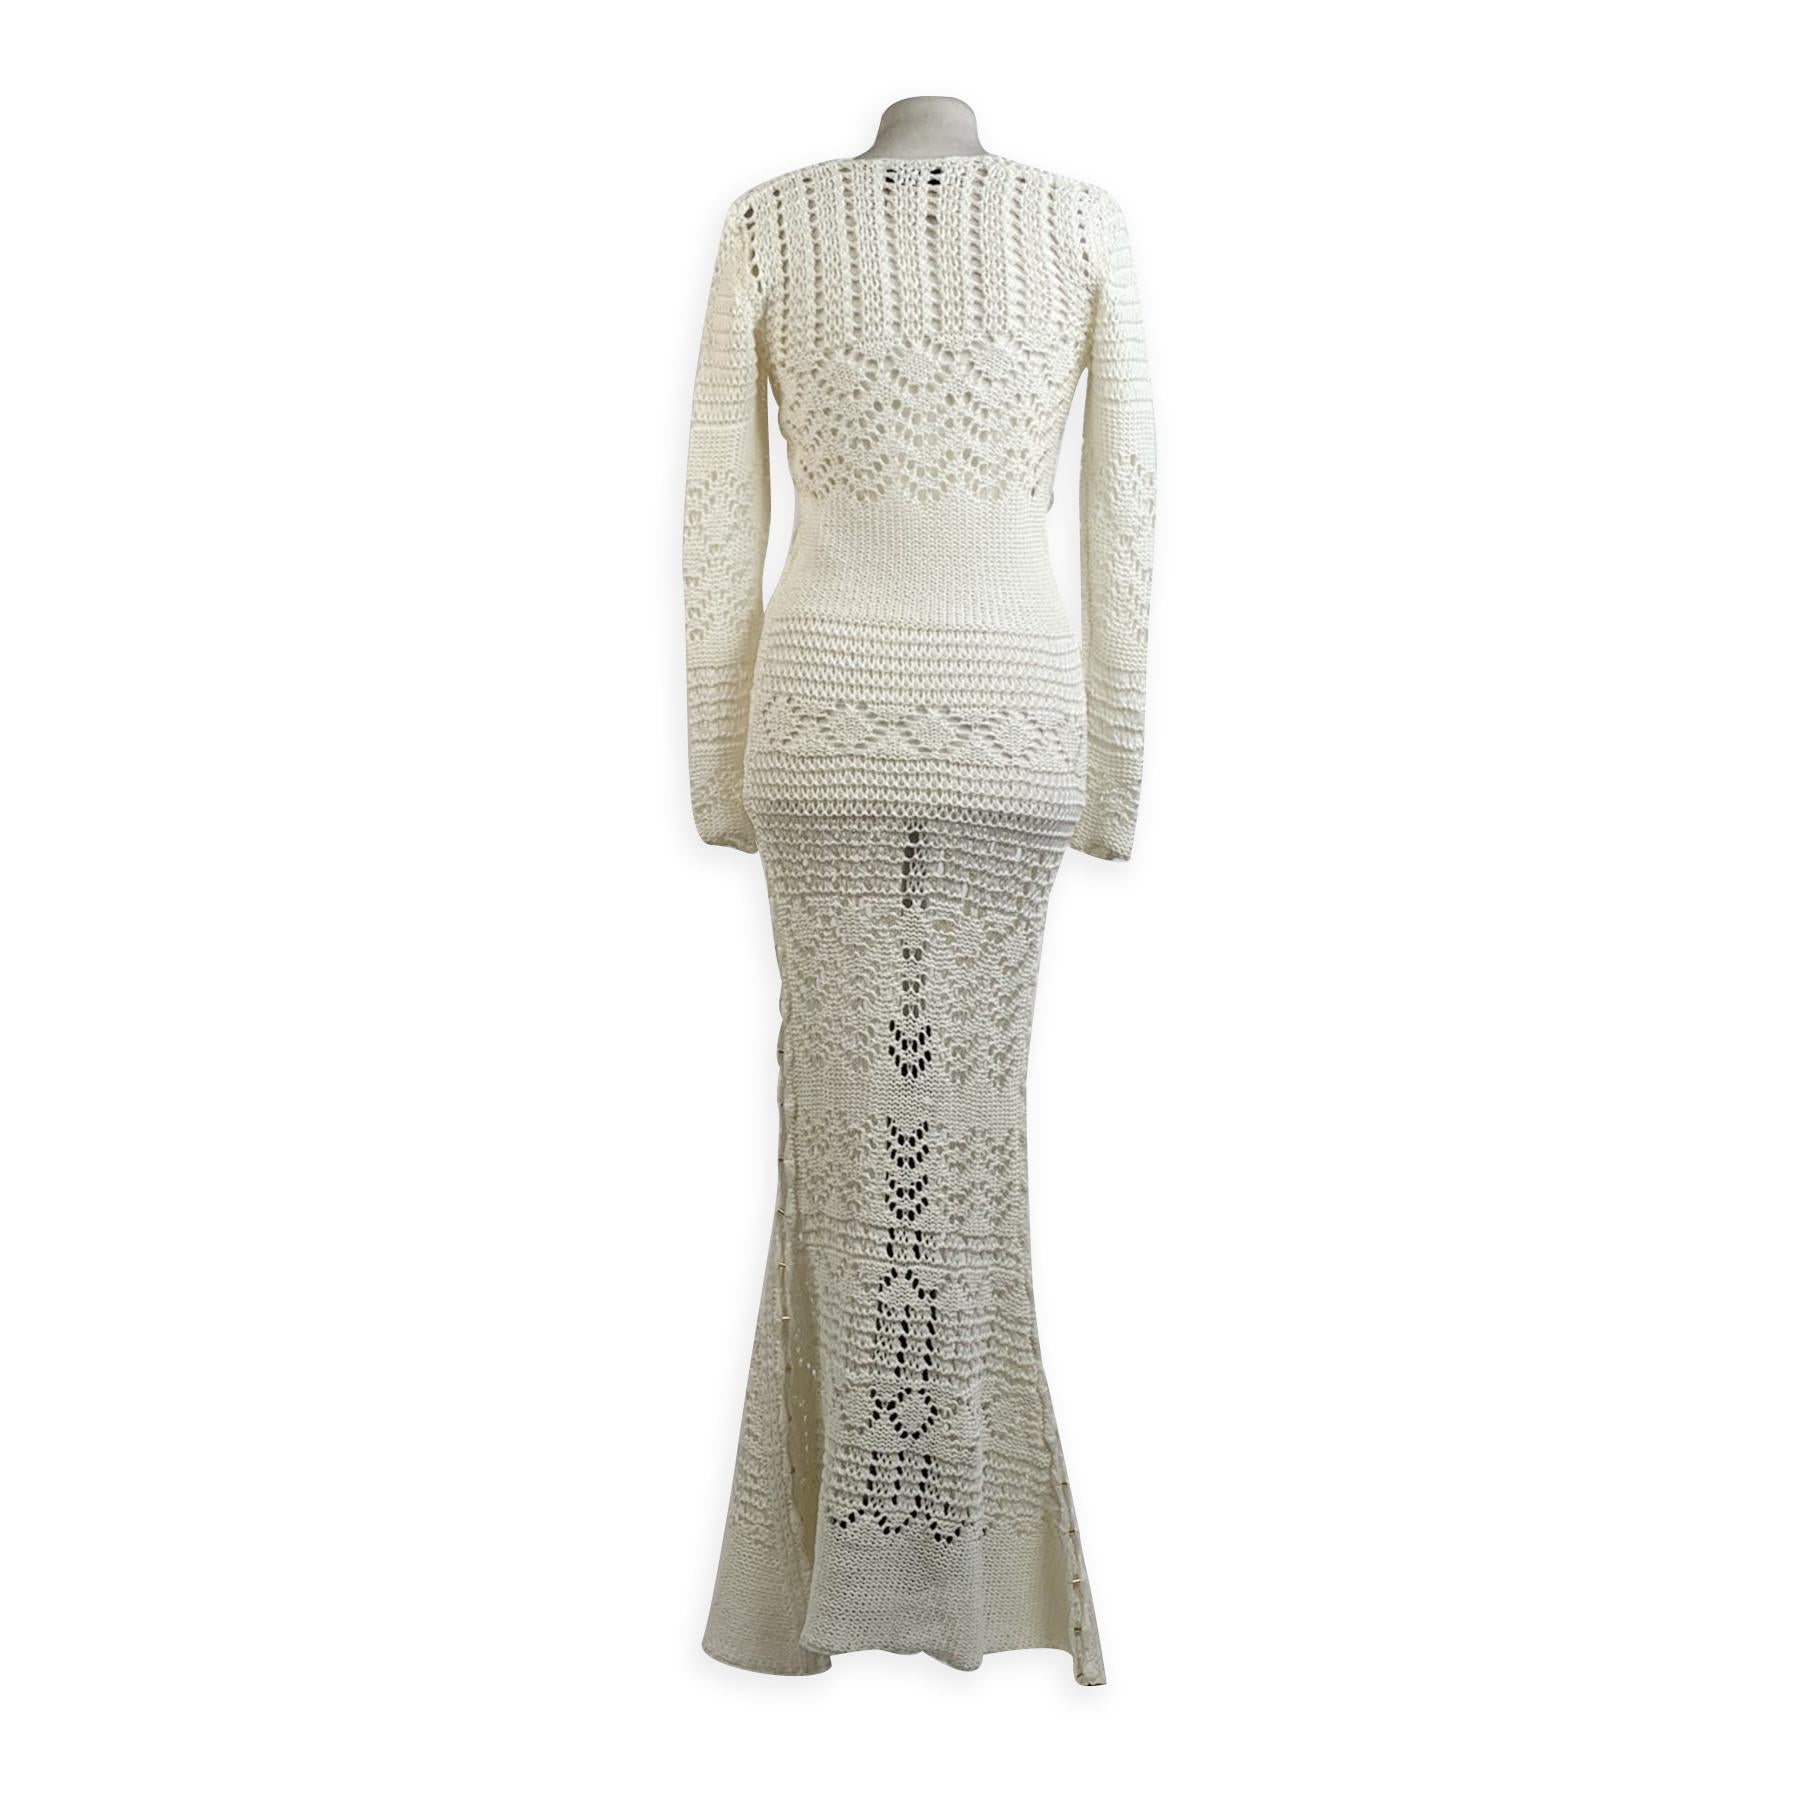 Stunning Emilio Pucci maxi crochet dress in white color, designed in 2011 by Peter Dundas. It features long sleeve styling and a key-hole detail with beautiful gold-tone clasp on the front. Cut-out detailing on the sides with gold tone accents.